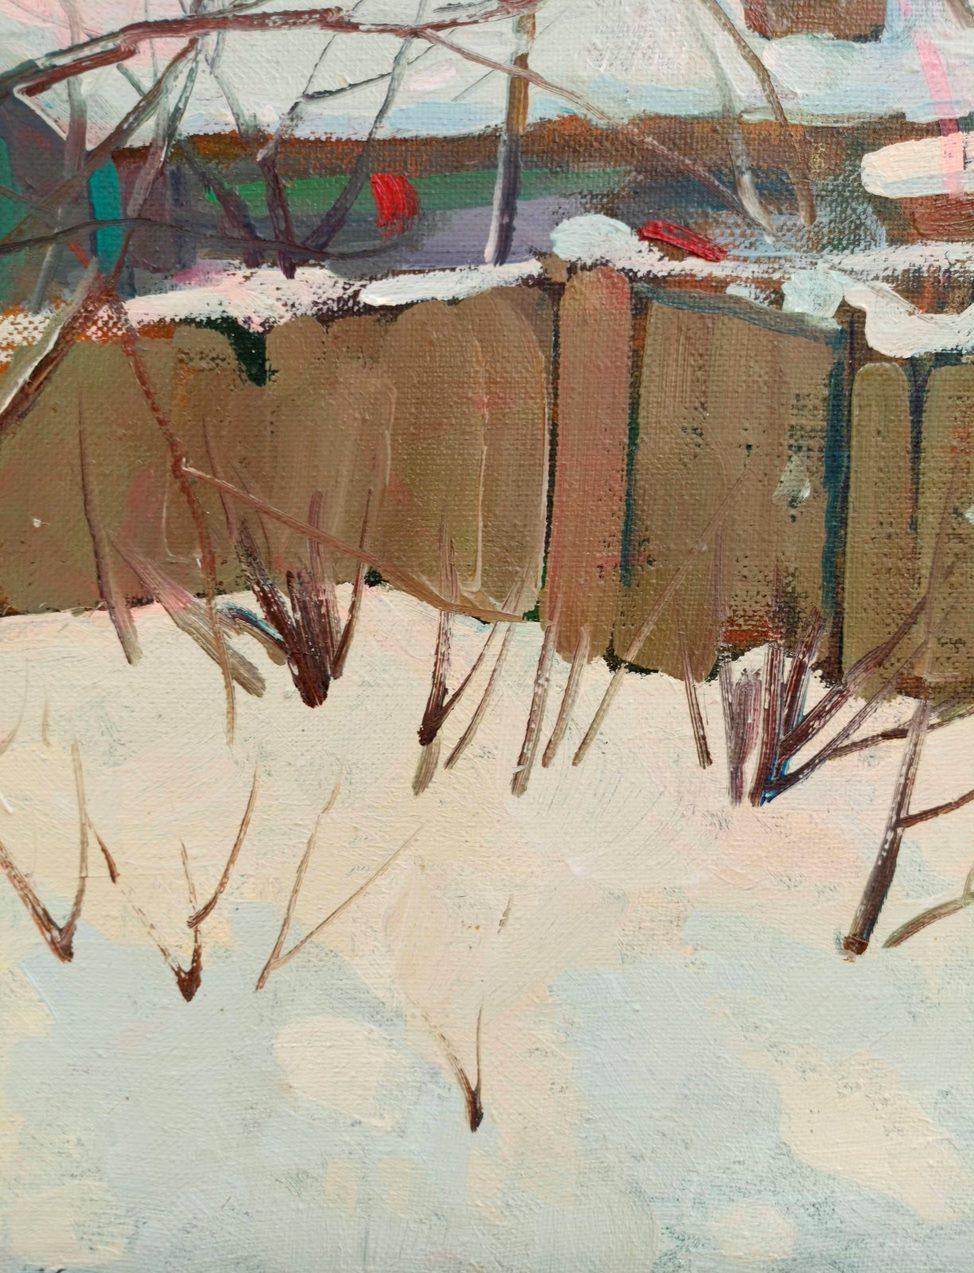 Artist: Peter Tovpev
Work: Original oil painting, handmade artwork, one of a kind 
Medium: Oil on Canvas 
Year: 2023
Style: Post Impressionism
Title: Winter Landscape
Size: 21.5